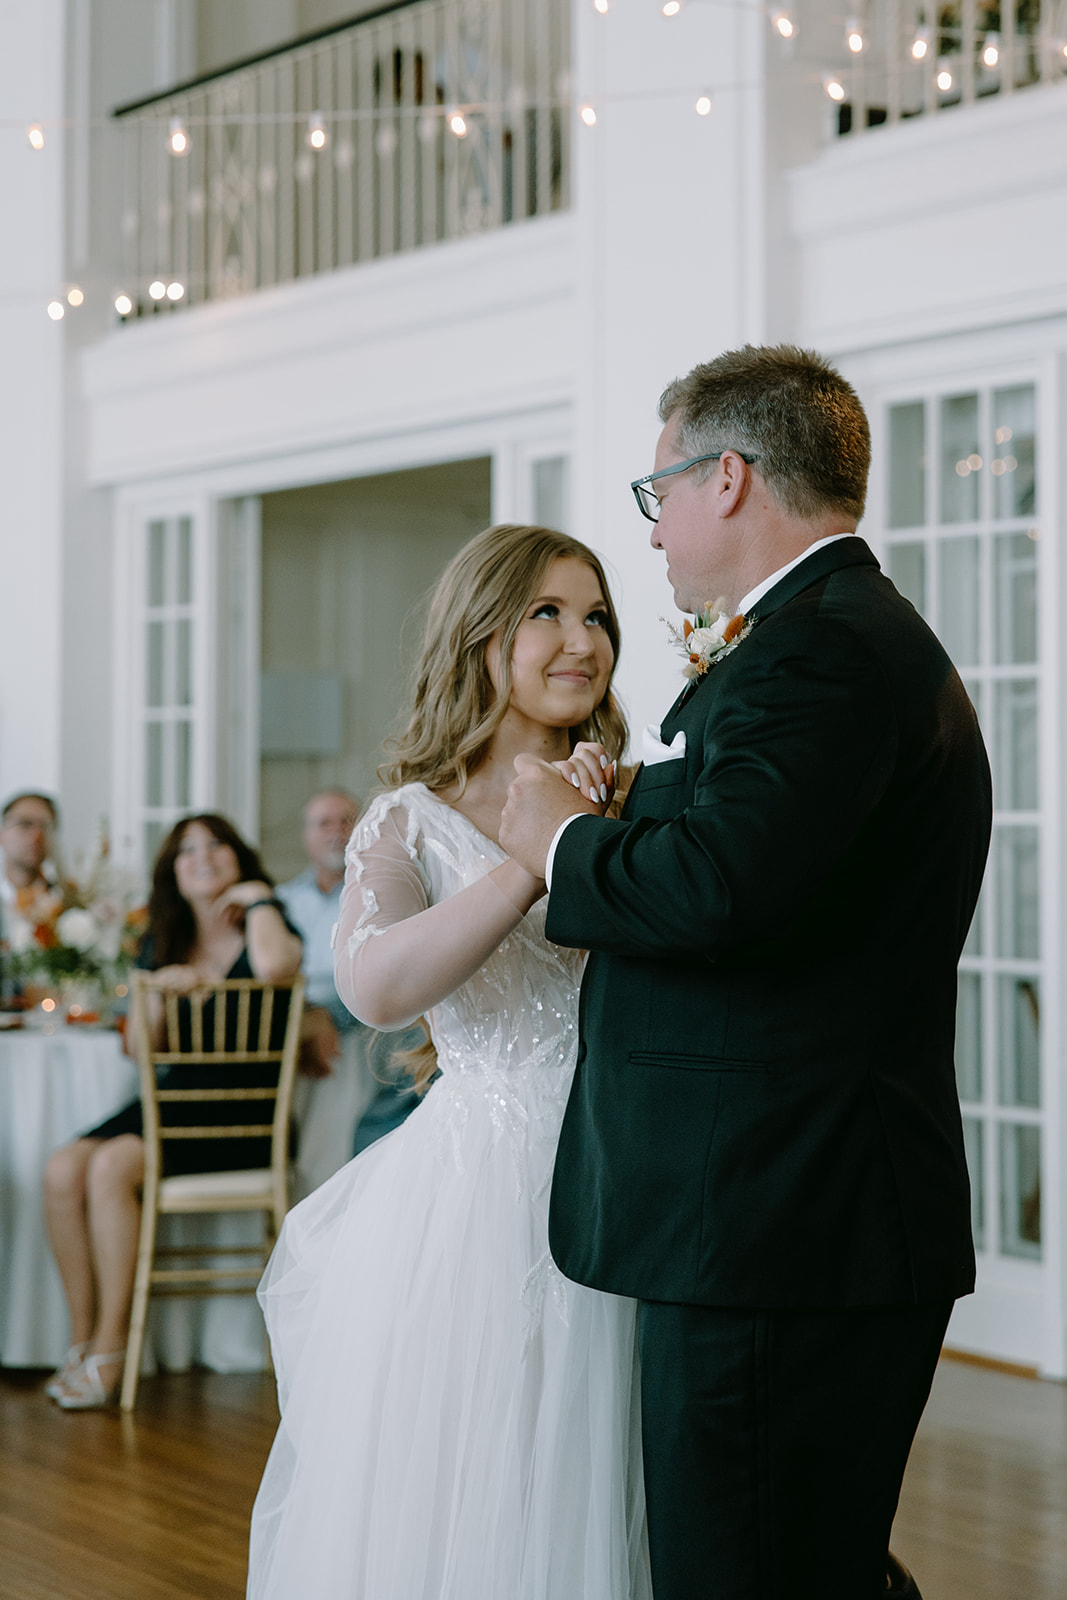 Summer wedding at Hotel Concord, captured by Charlotte Wedding Photographers and Videographers in North Carolina